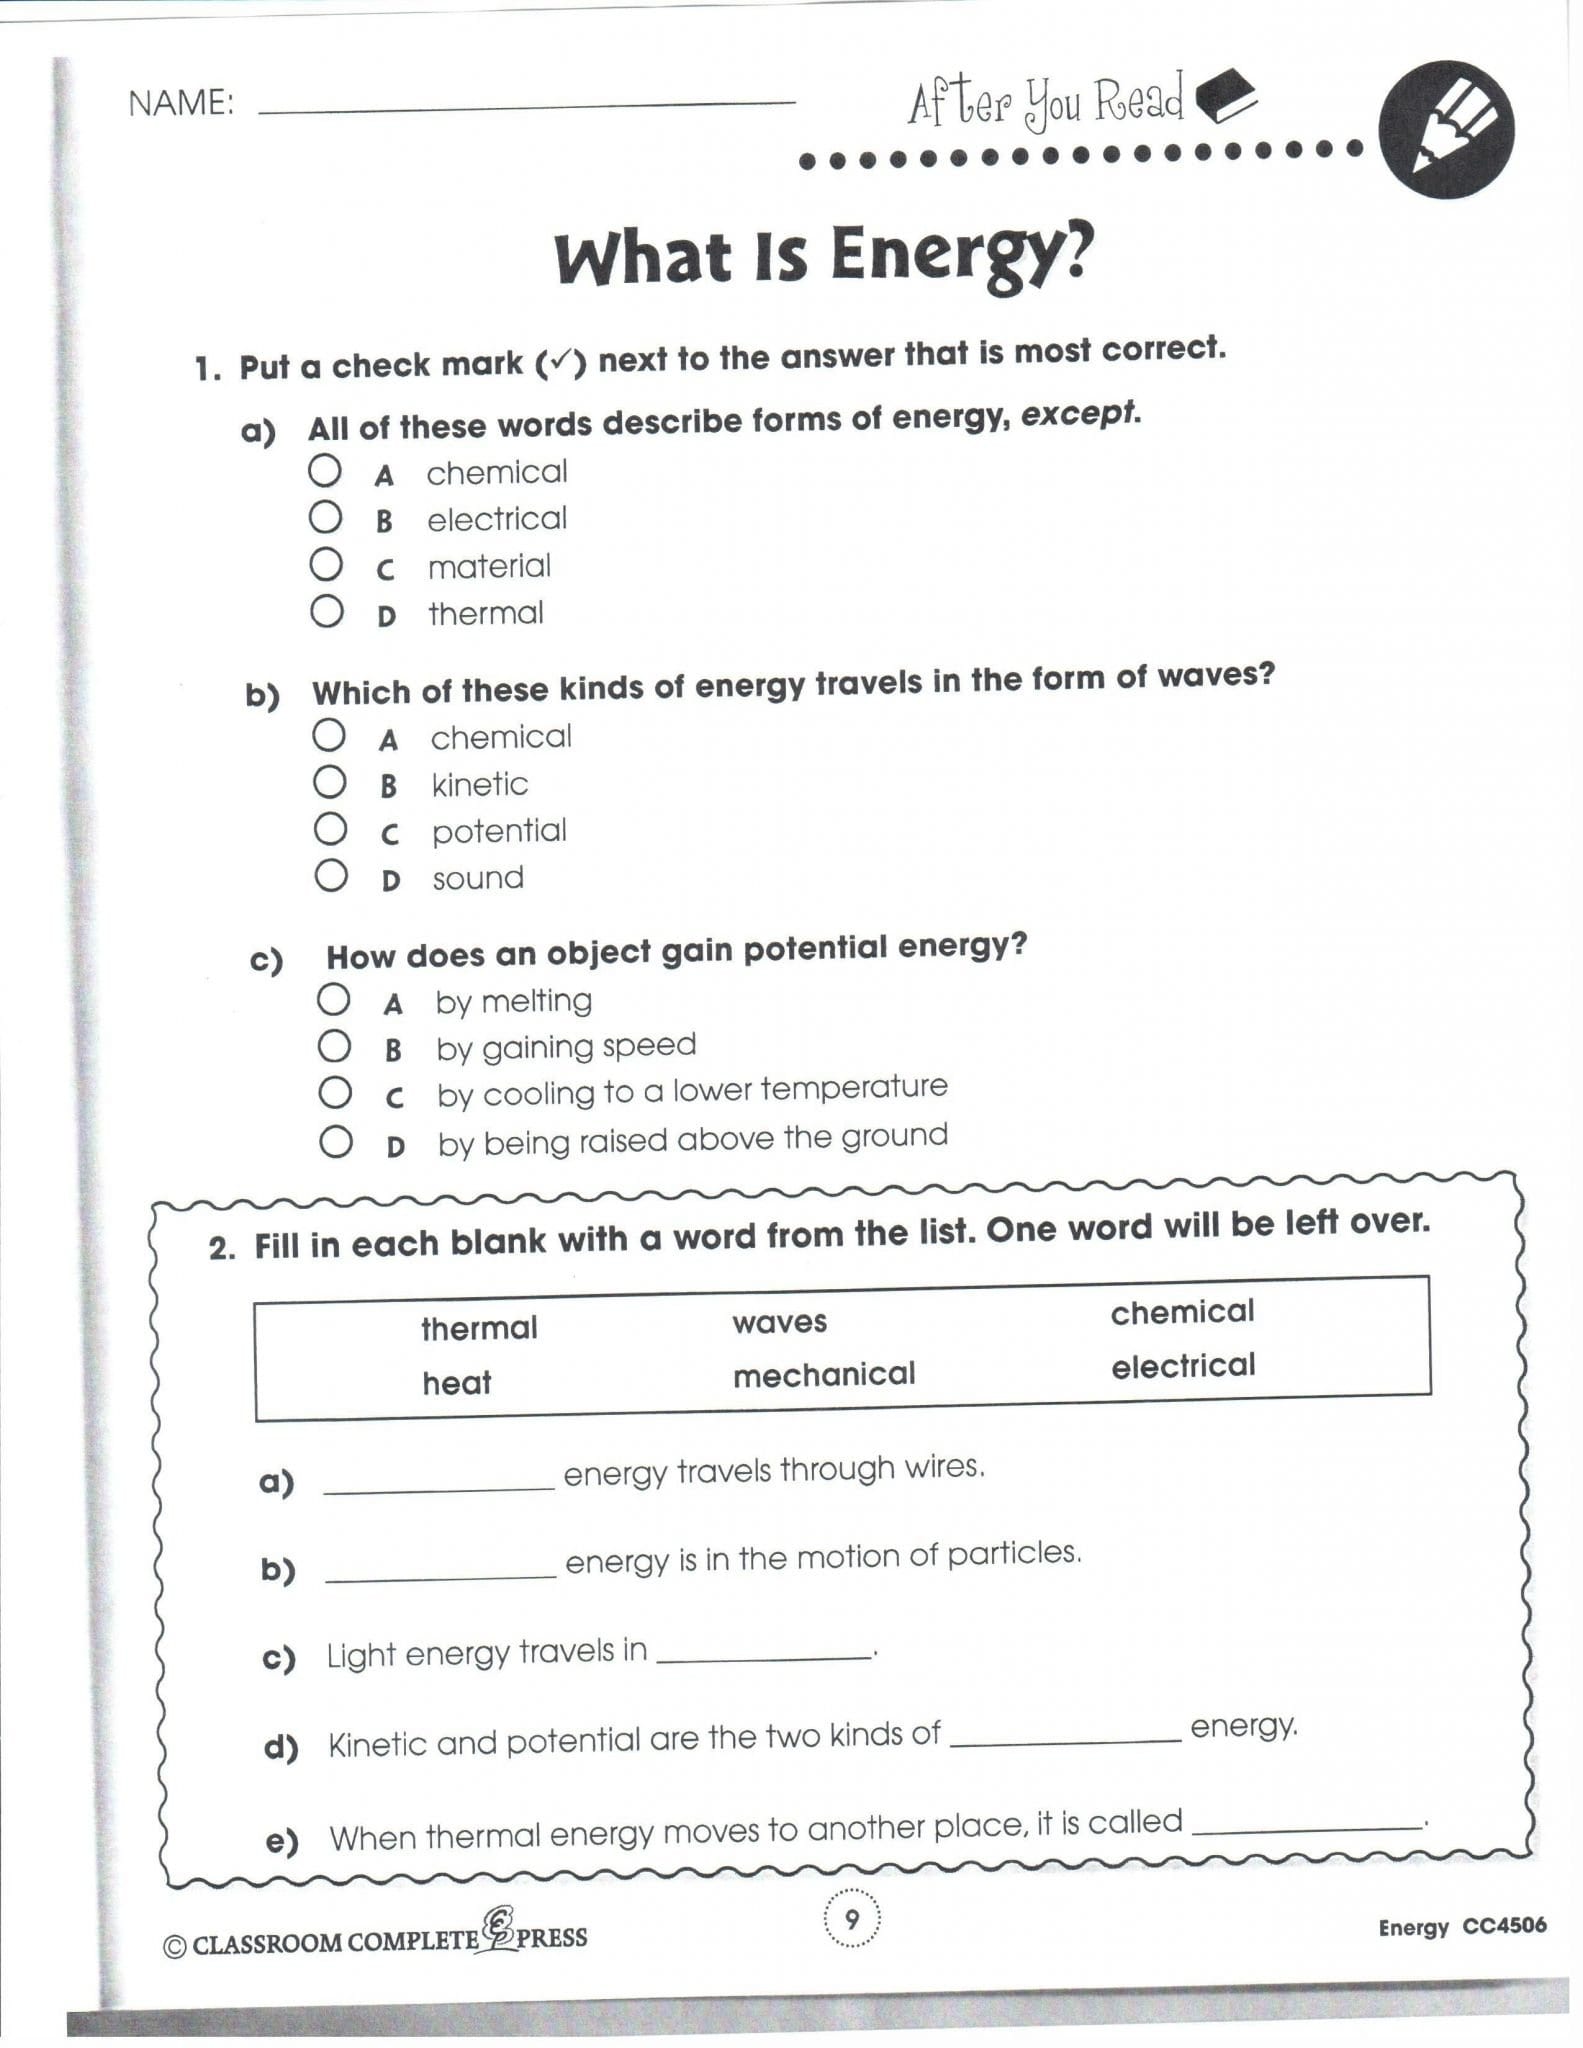 National Geographic Colliding Continents Worksheet Answers Also National Geographic Colliding Continents Worksheet Answers